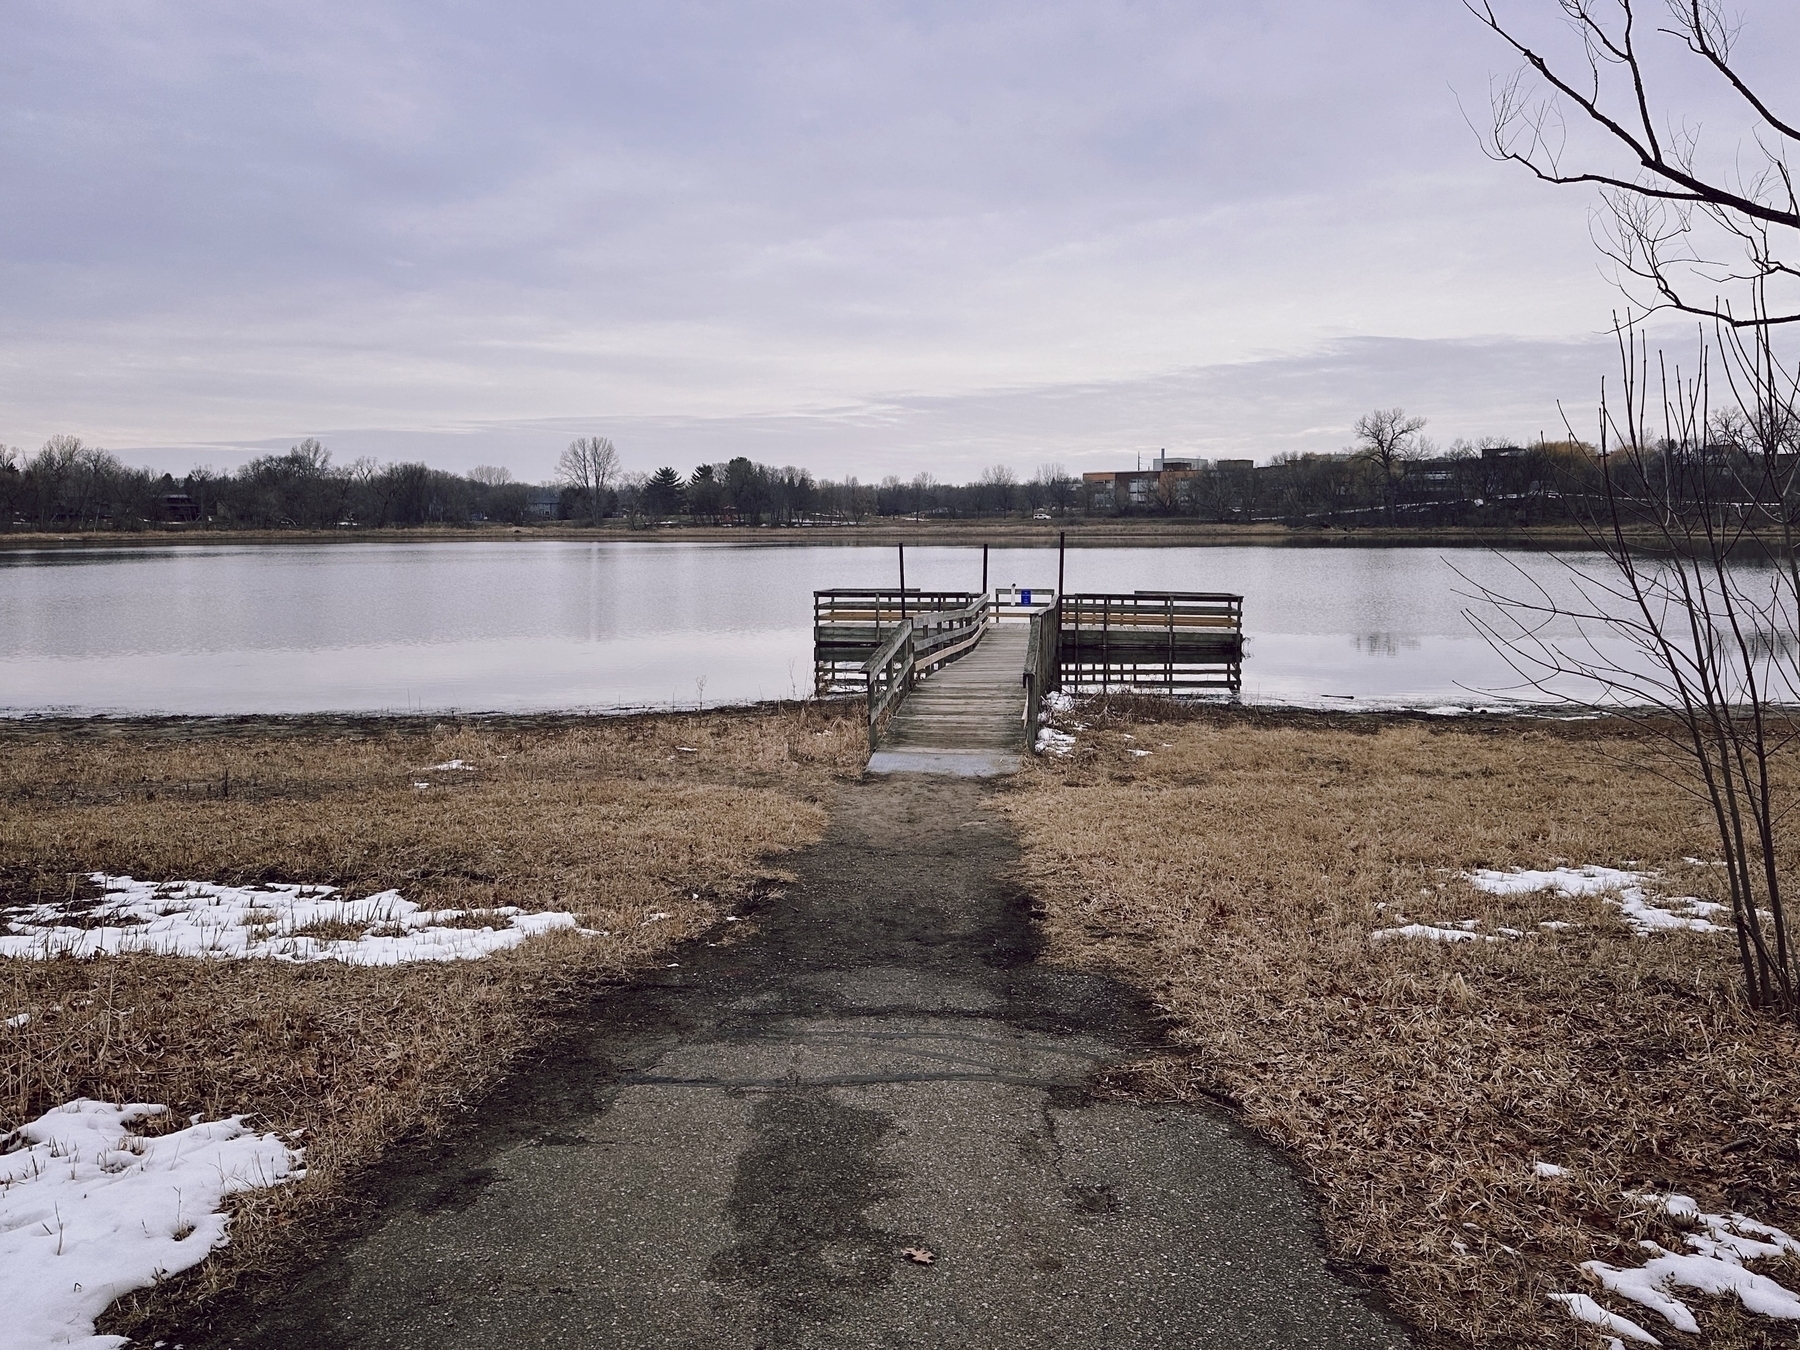 A weathered wooden pier extends into a calm lake with dry, brown grass and patches of snow along the shore, under a cloudy sky.